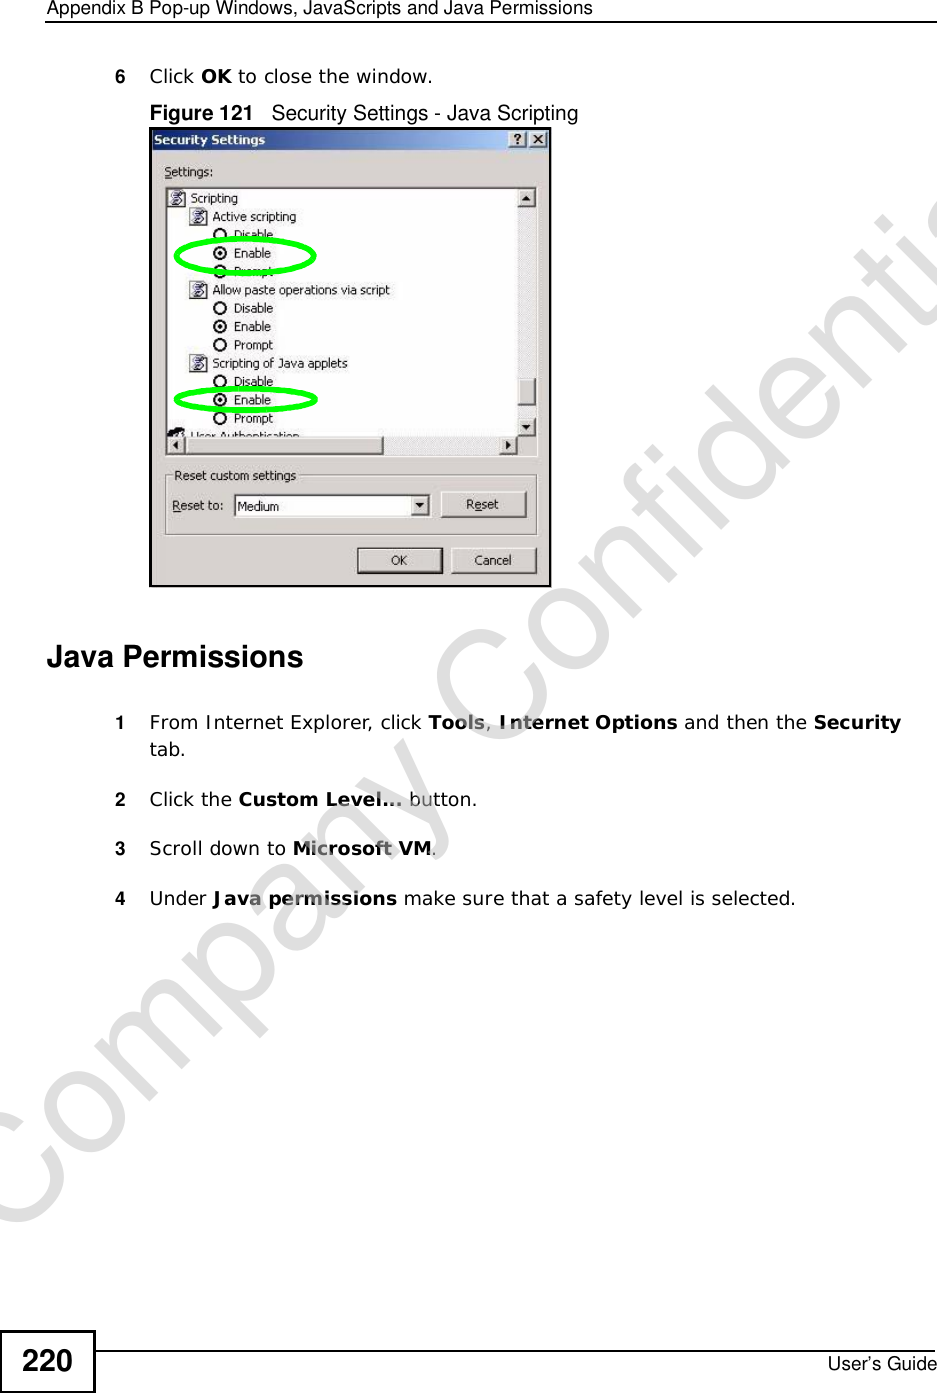 Appendix BPop-up Windows, JavaScripts and Java PermissionsUser’s Guide2206Click OK to close the window.Figure 121   Security Settings - Java ScriptingJava Permissions1From Internet Explorer, click Tools,Internet Options and then the Securitytab. 2Click the Custom Level... button. 3Scroll down to Microsoft VM.4Under Java permissions make sure that a safety level is selected.Company Confidential